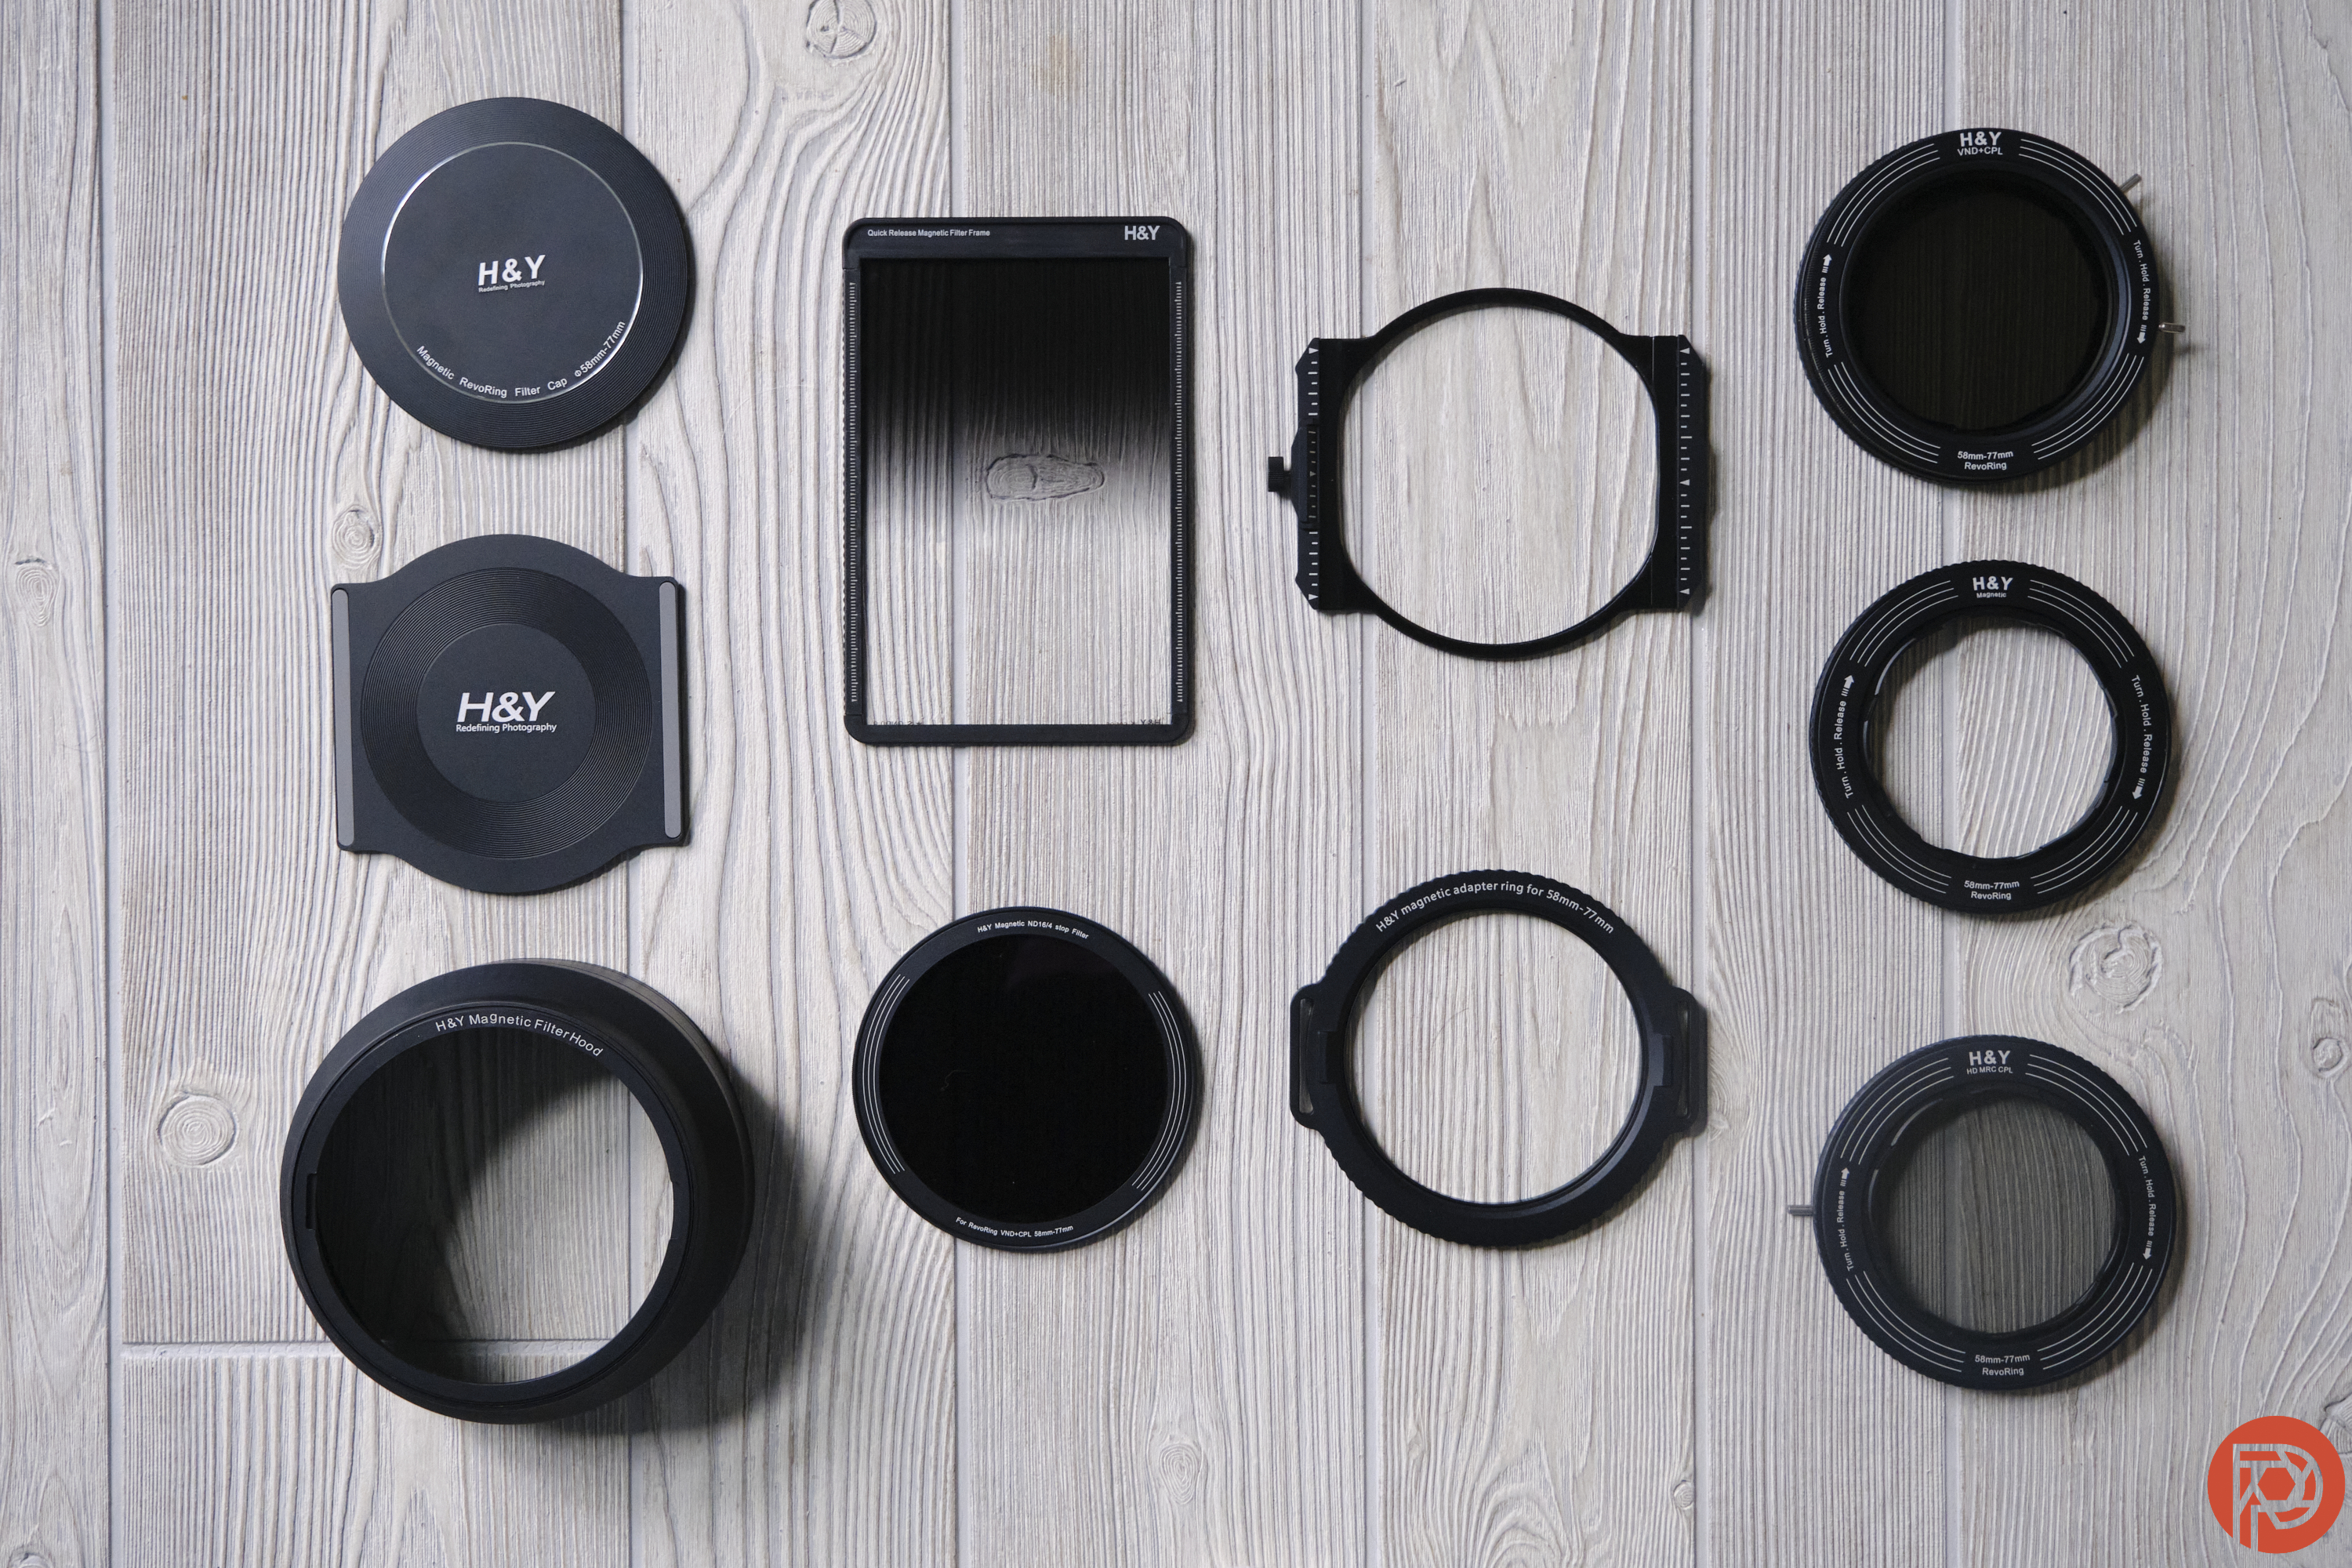 Epic, Magic Filter Actually Changes Size: New H&Y Revoring Swift Review